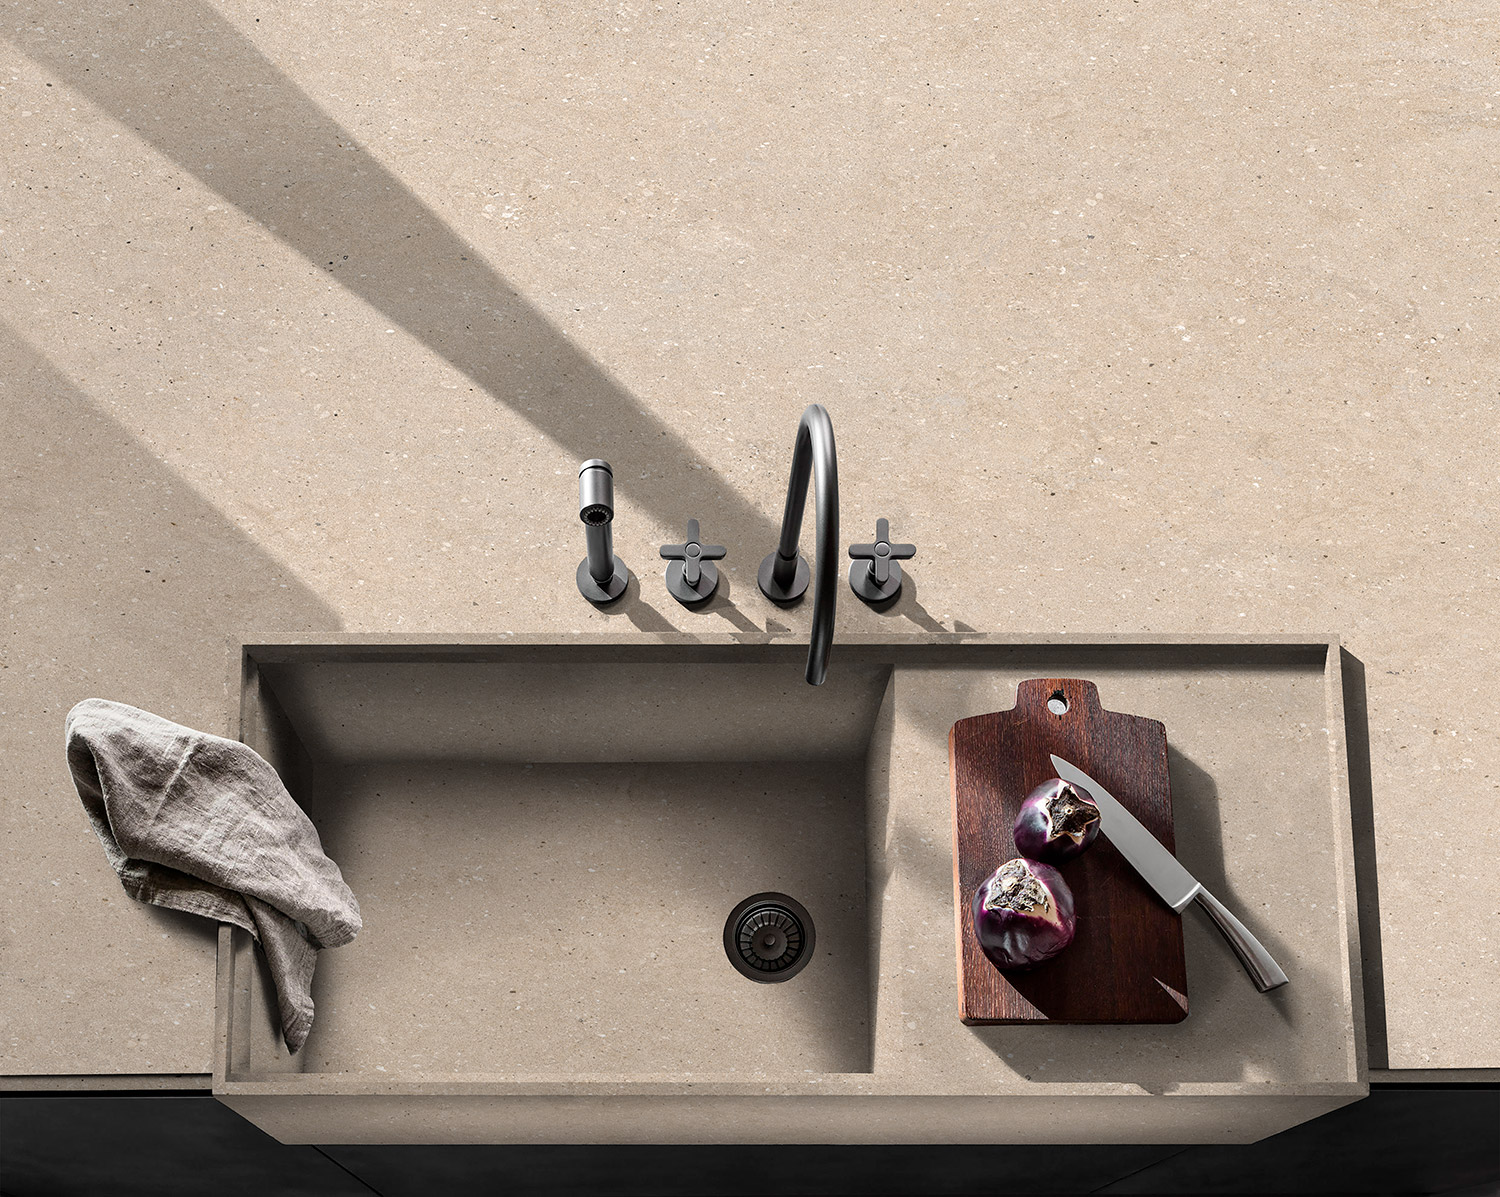 Undermount sink versus countertop with integrated sink: choose the best one for your kitchen